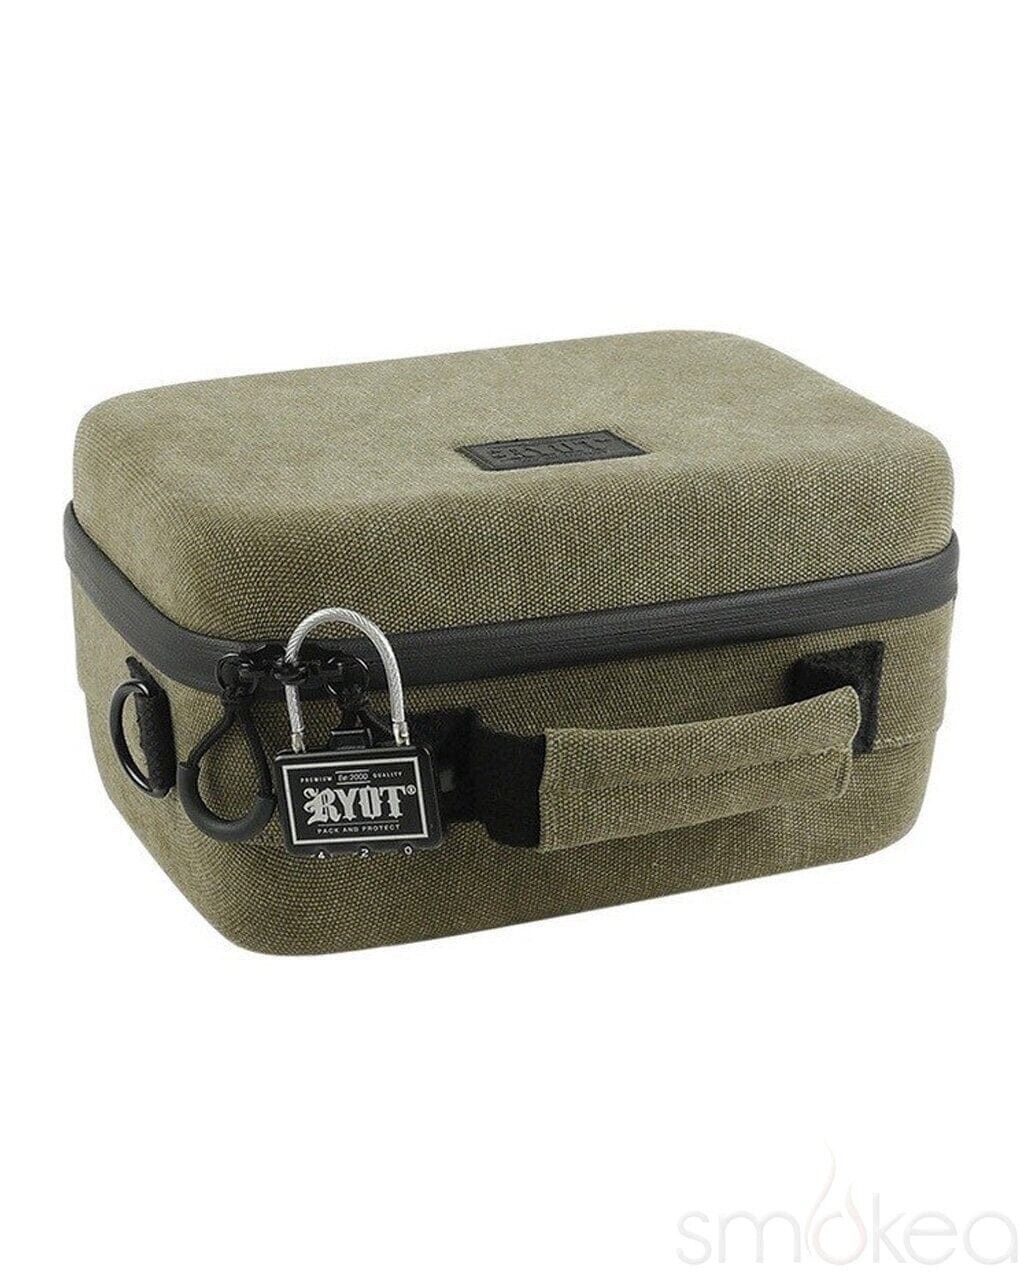 Ryot LARGE Safe Case Carbon Series Pipe Case - Olive - BRAND NEW